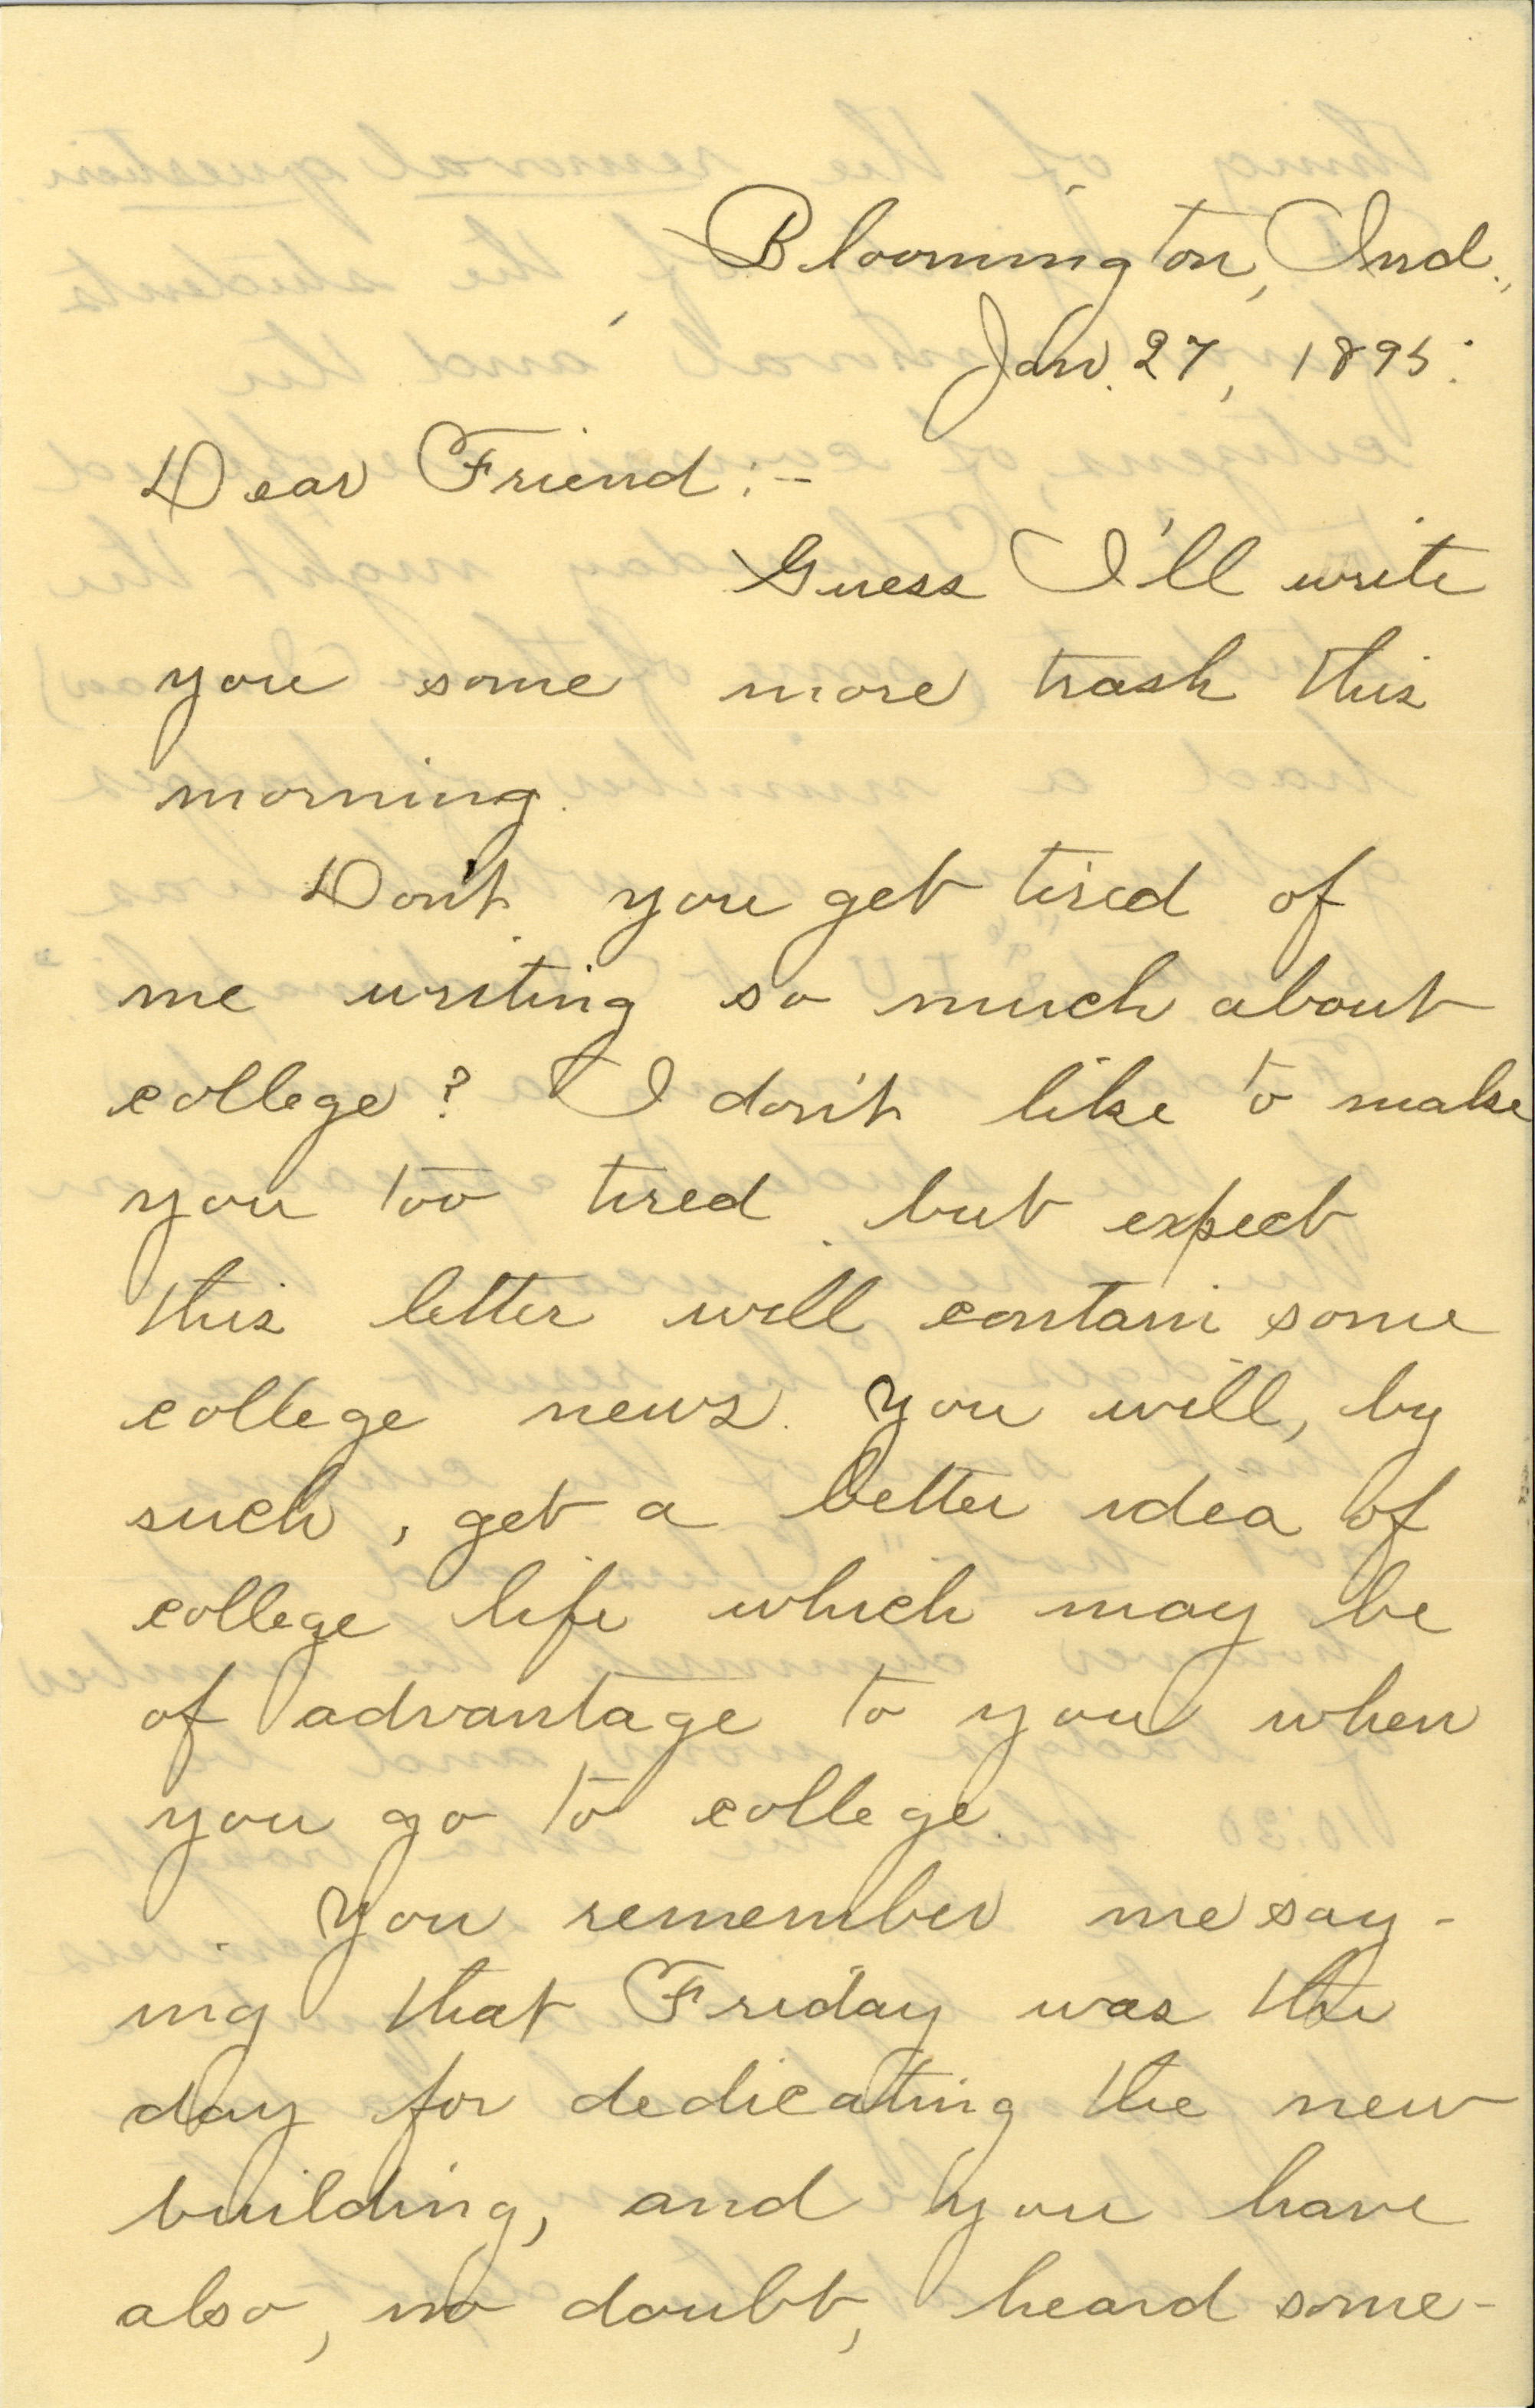 This is a scan of a letter from January 27, 1895 in cursive handwriting. 